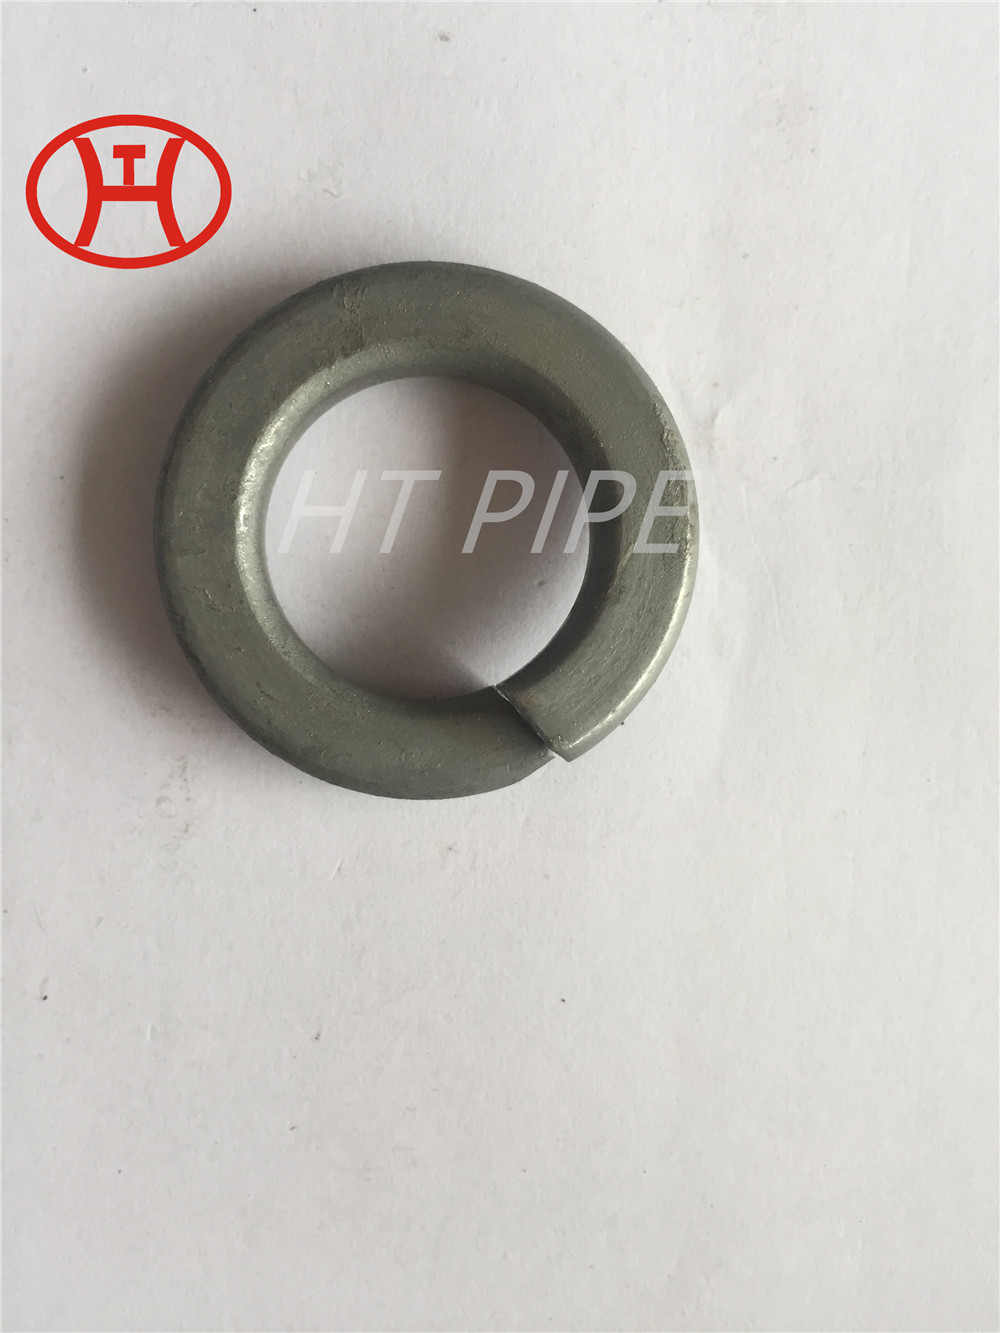 nicke alloy Alloy 20 helical spring lock washer DIN127